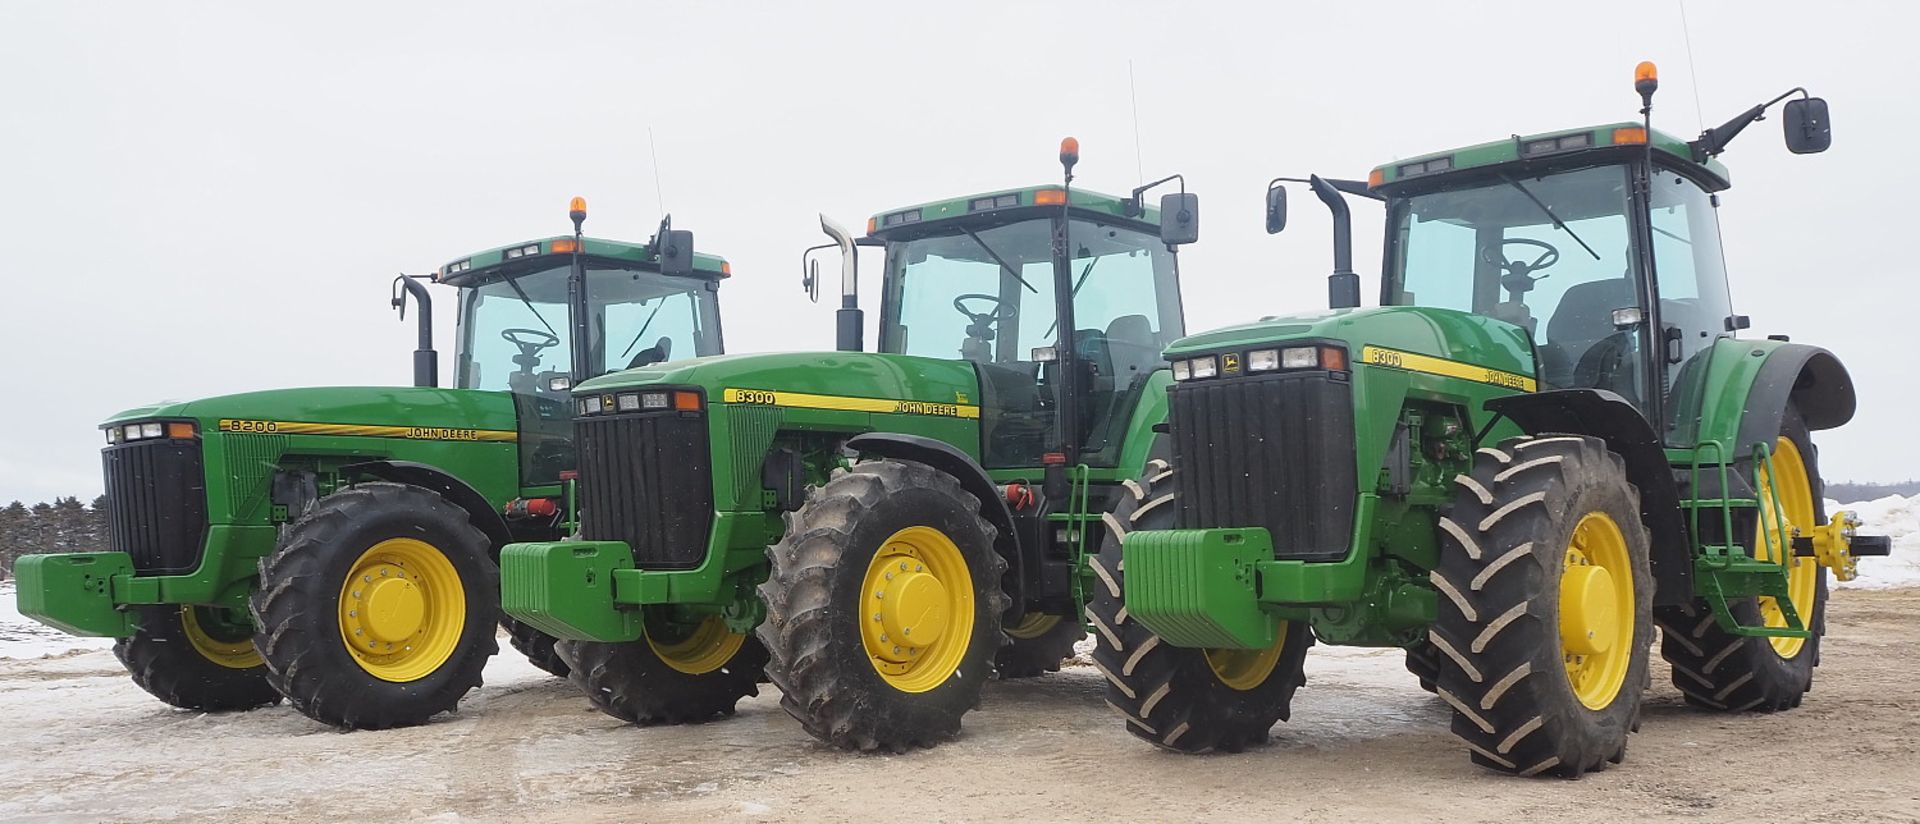 JD 8200, and sister JD 8300 Tractors